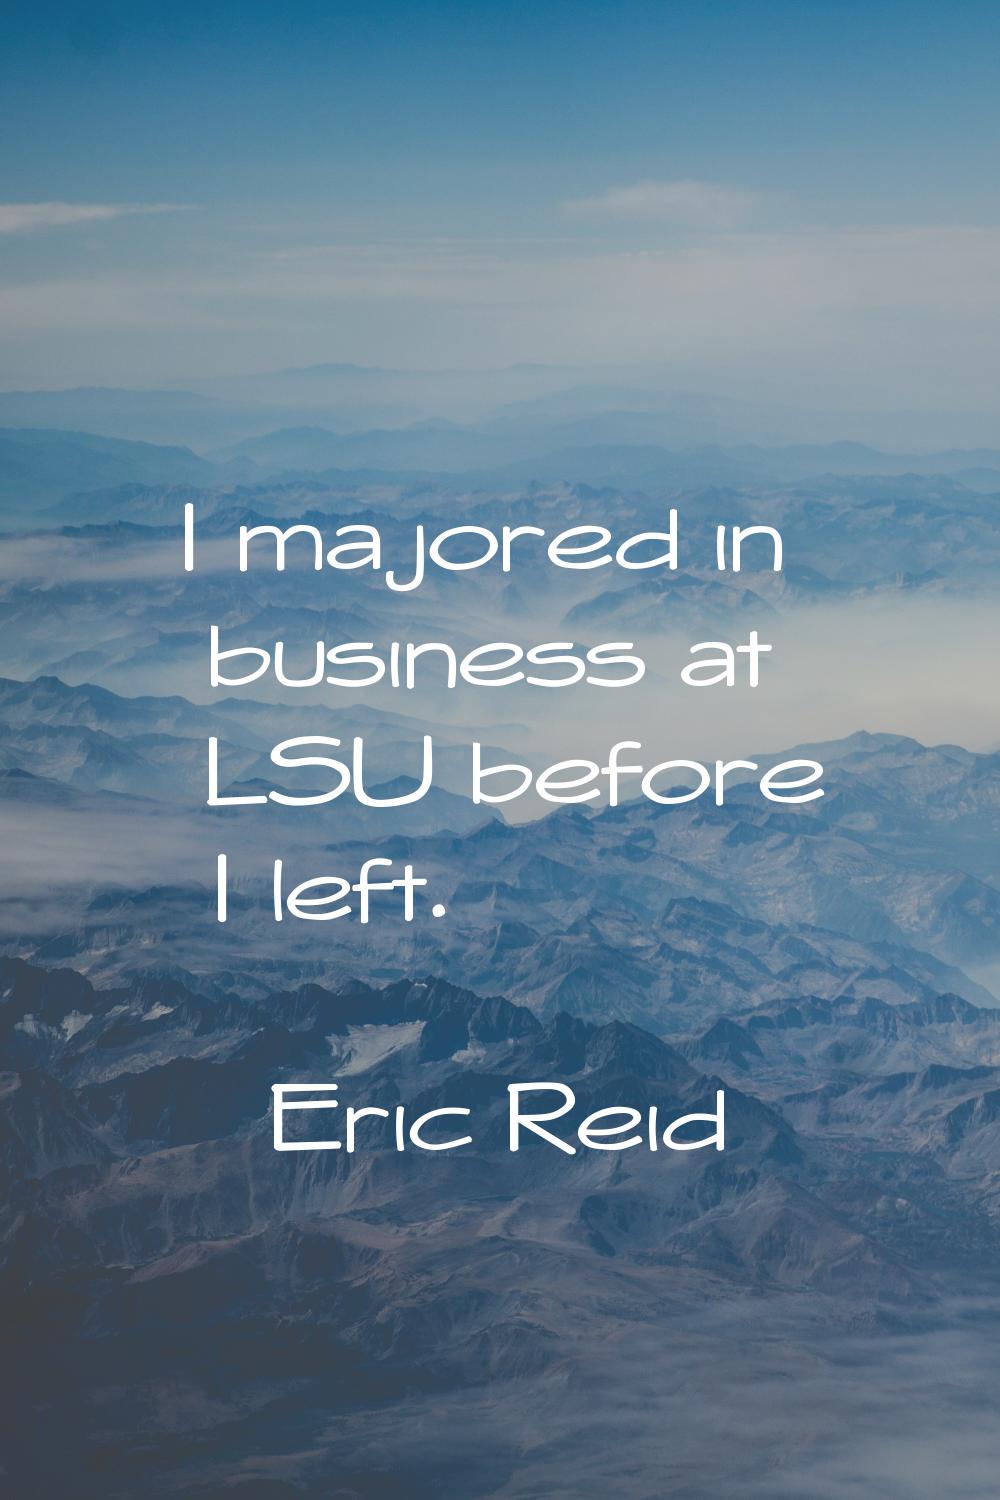 I majored in business at LSU before I left.